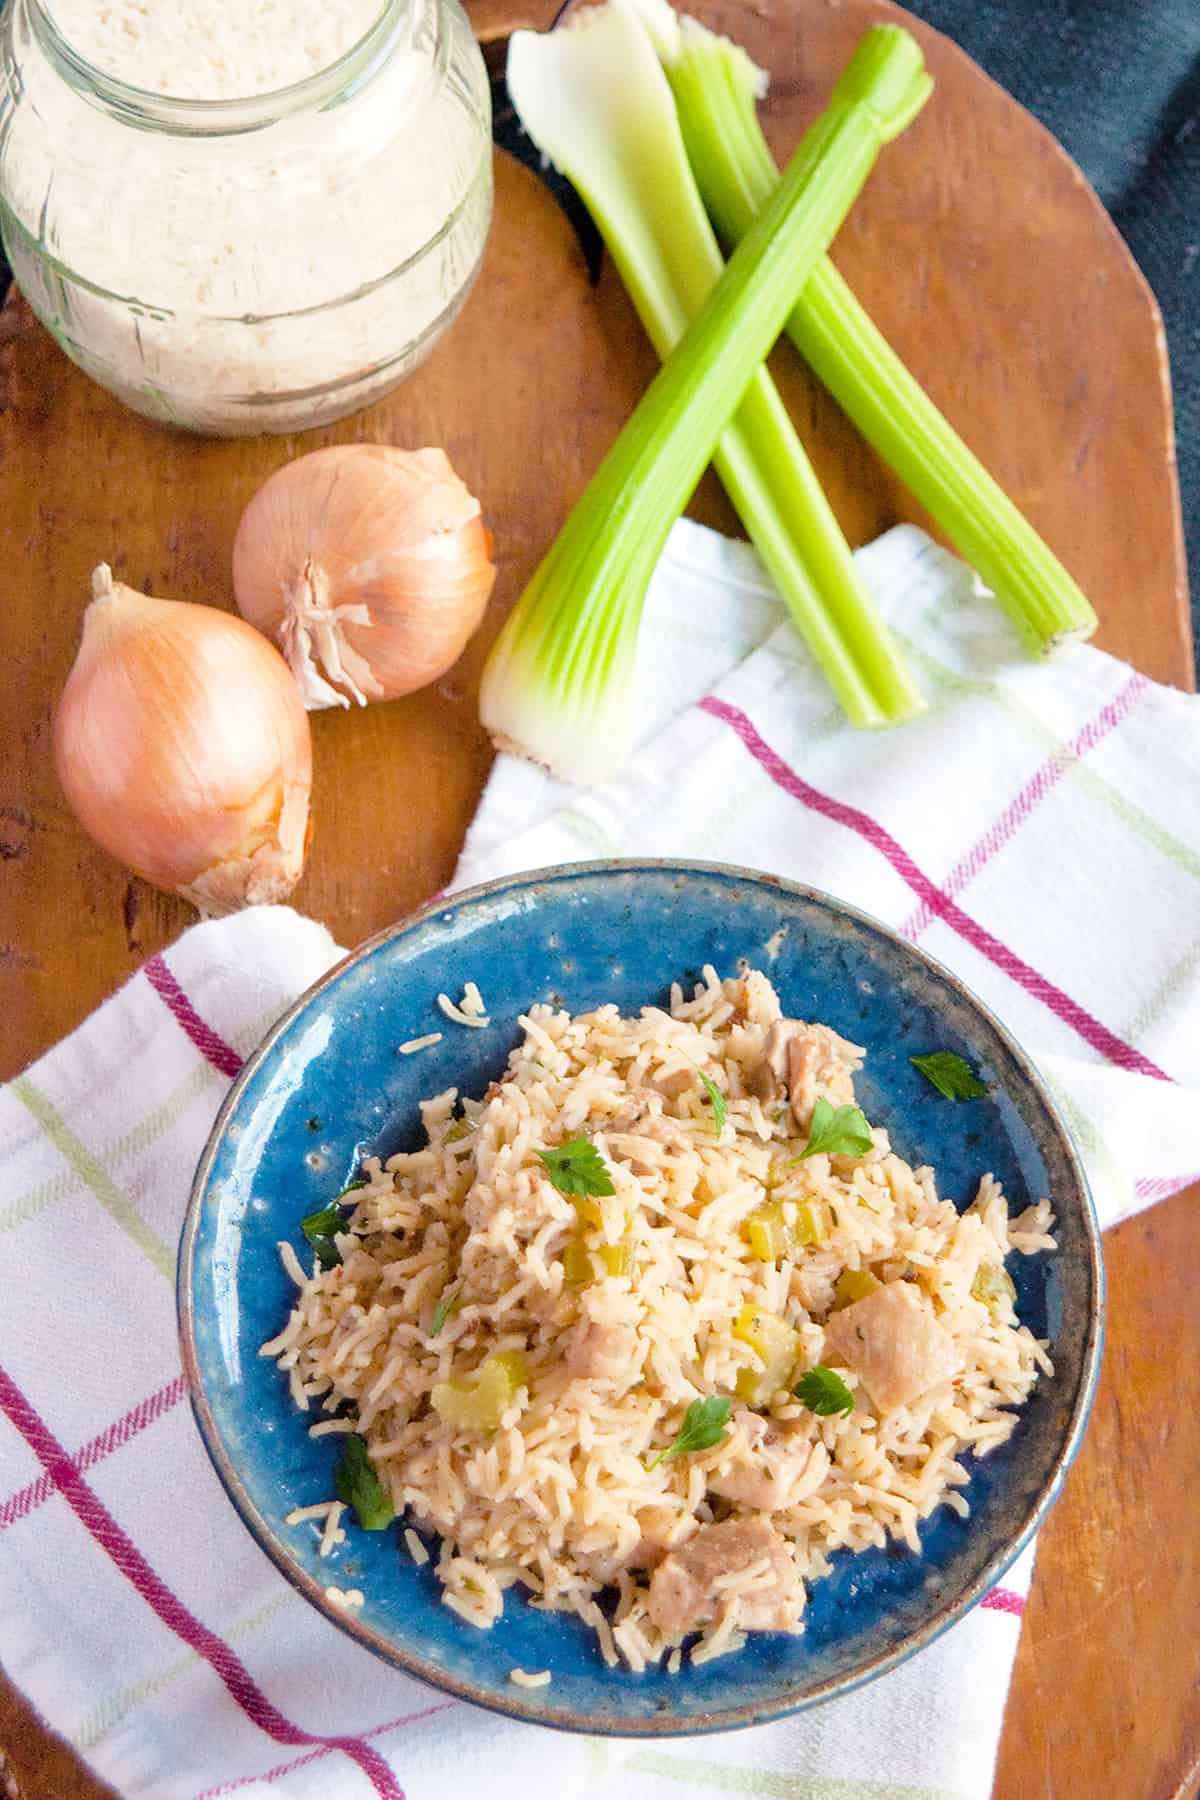 Chicken and rice in a blue bowl on a wooden board.